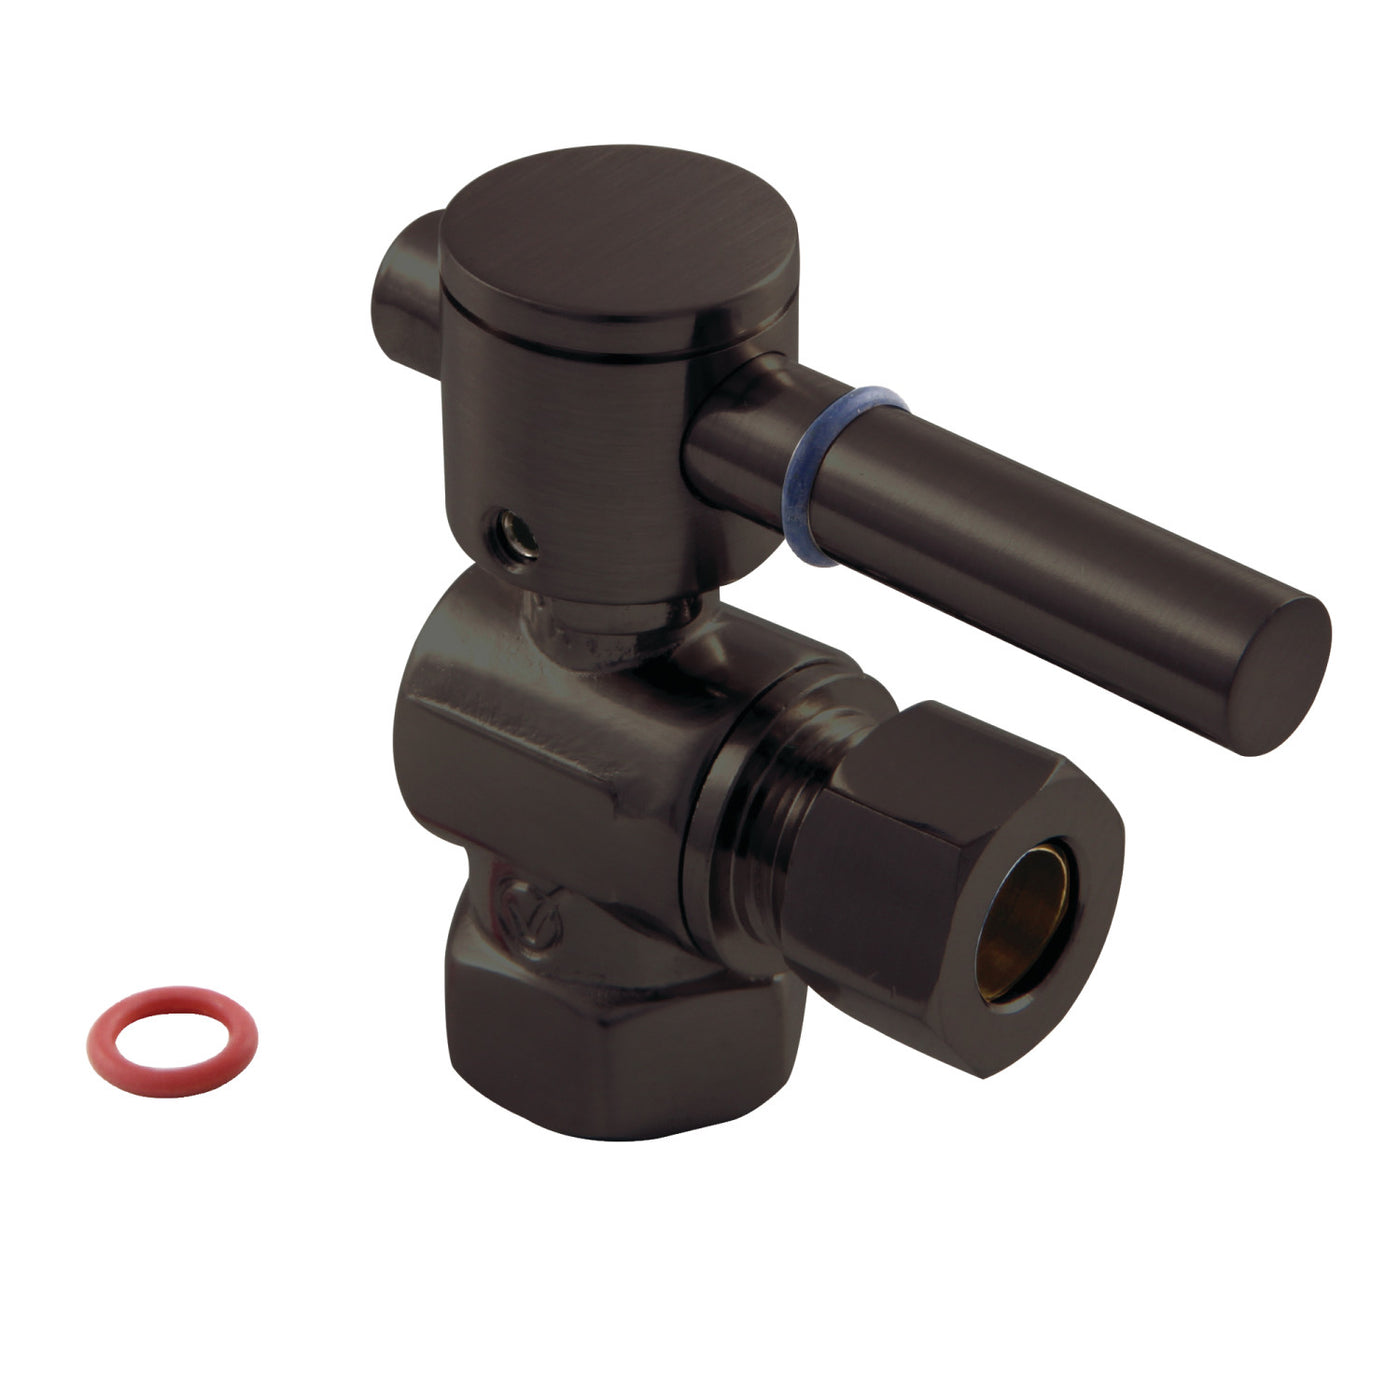 Elements of Design ECC33105DL 3/8-Inch FIP x 3/8-Inch OD Comp Quarter-Turn Angle Stop Valve, Oil Rubbed Bronze